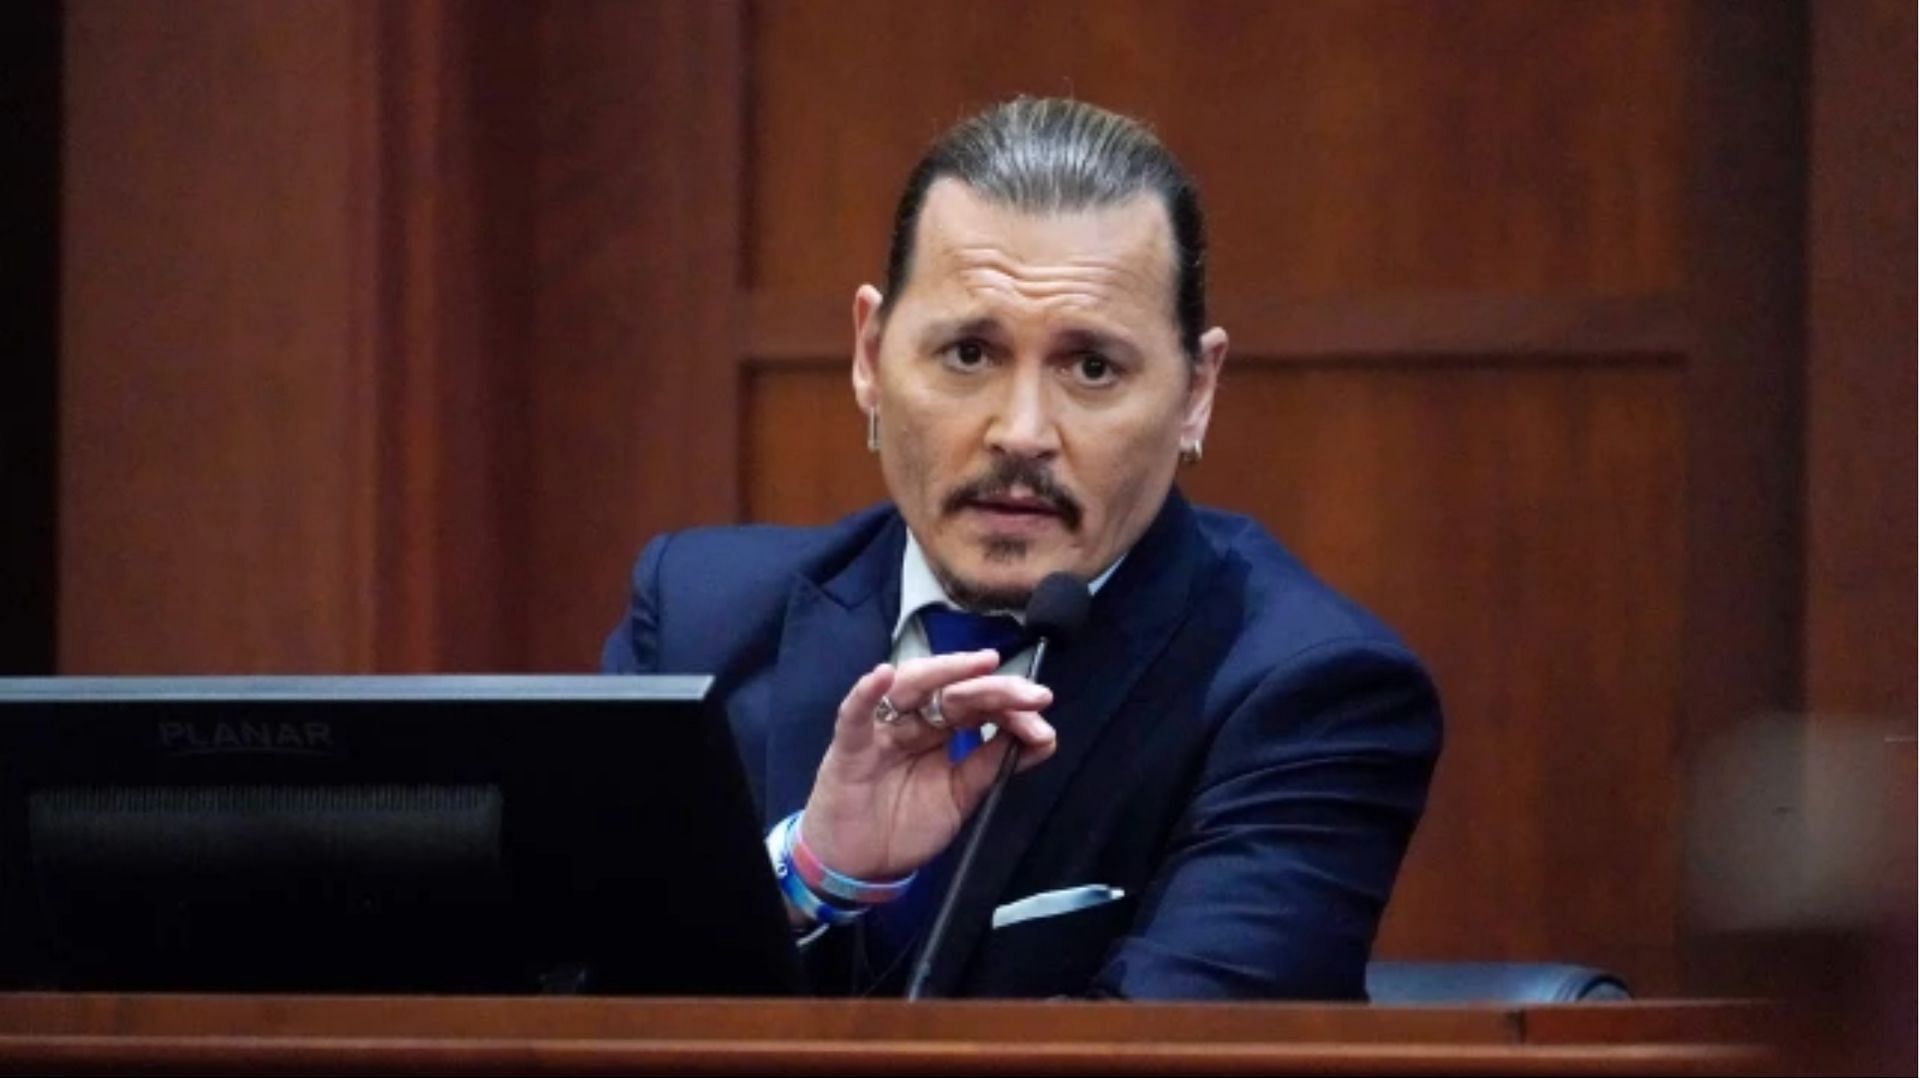 Johnny Depp was accused by Gregg Brooks for assaulting him in April 2017 on the set of City of Lies. (Image via Getty Images/Steve Helber)